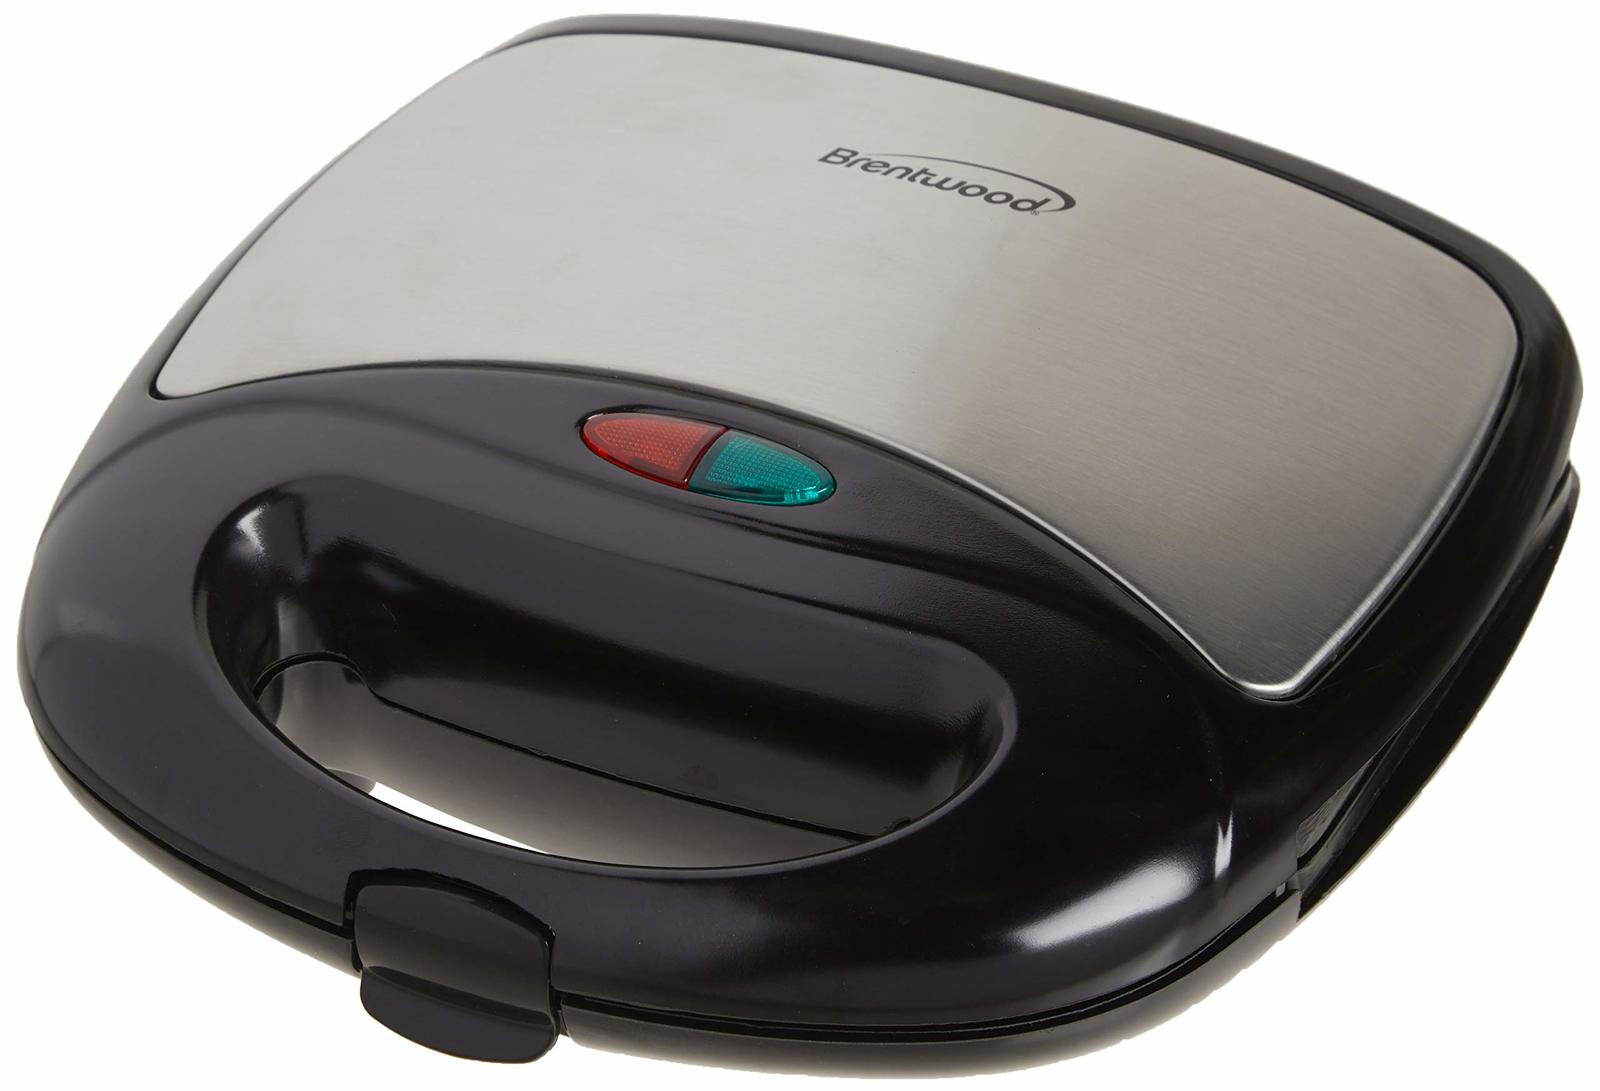 Primary image for Brentwood Compact Dual Sandwich Maker, Non-Stick, Black